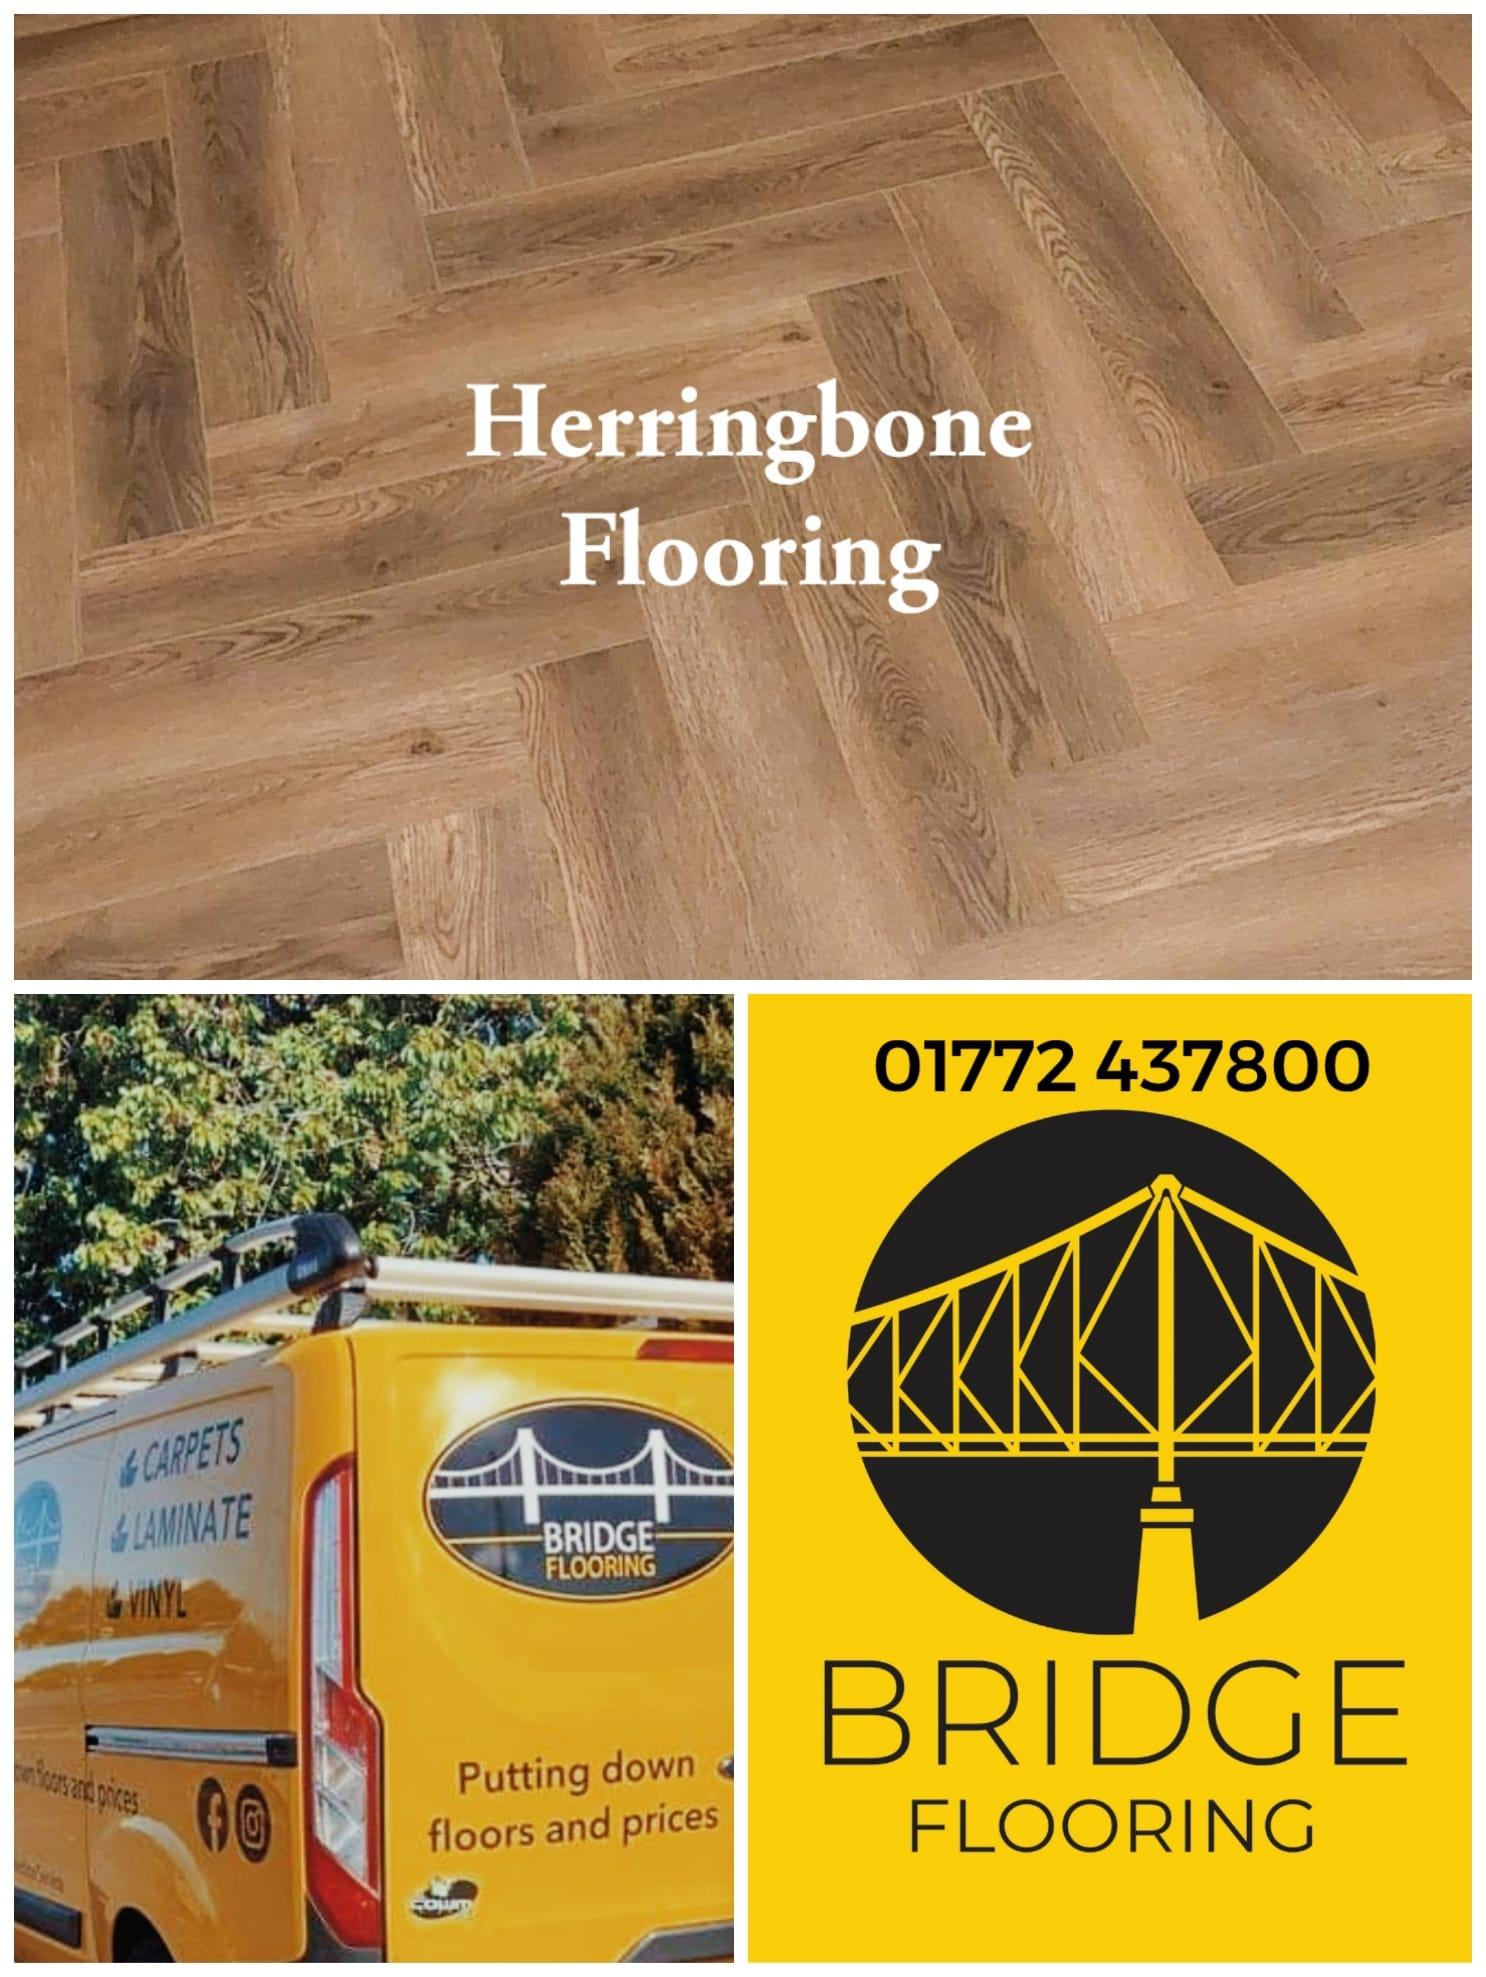 Bridge Flooring - here for our Customers, we offer a free quote on flooring.  No job too small.